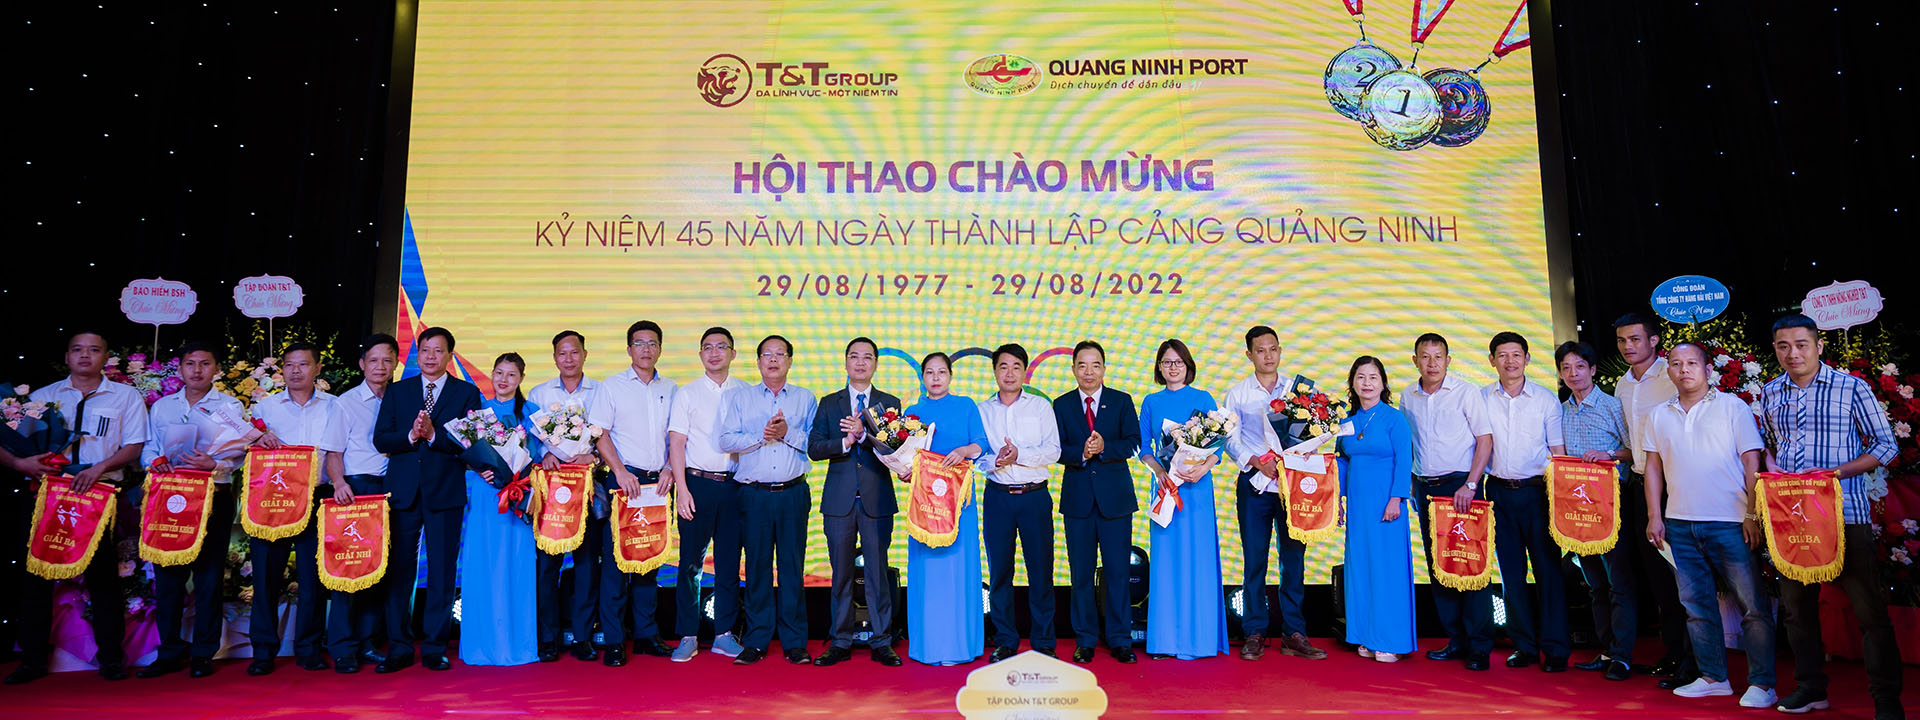 Record numbers of cargo handling in September 2022 at Quang Ninh Port